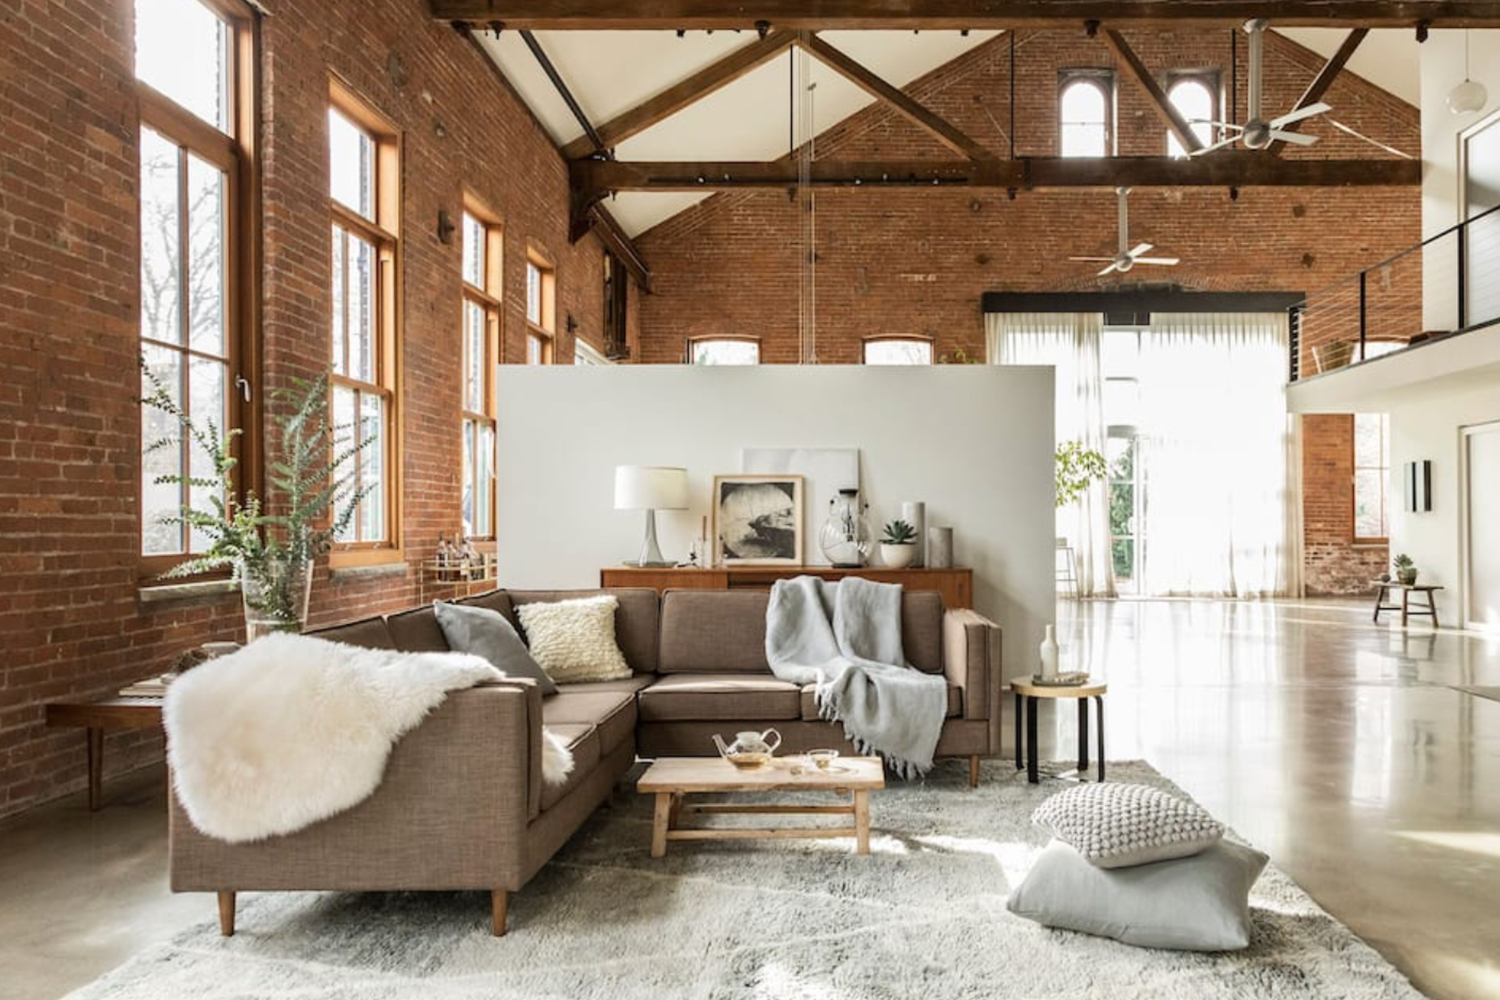 Design Loft Converted From 1860s Brick Factory